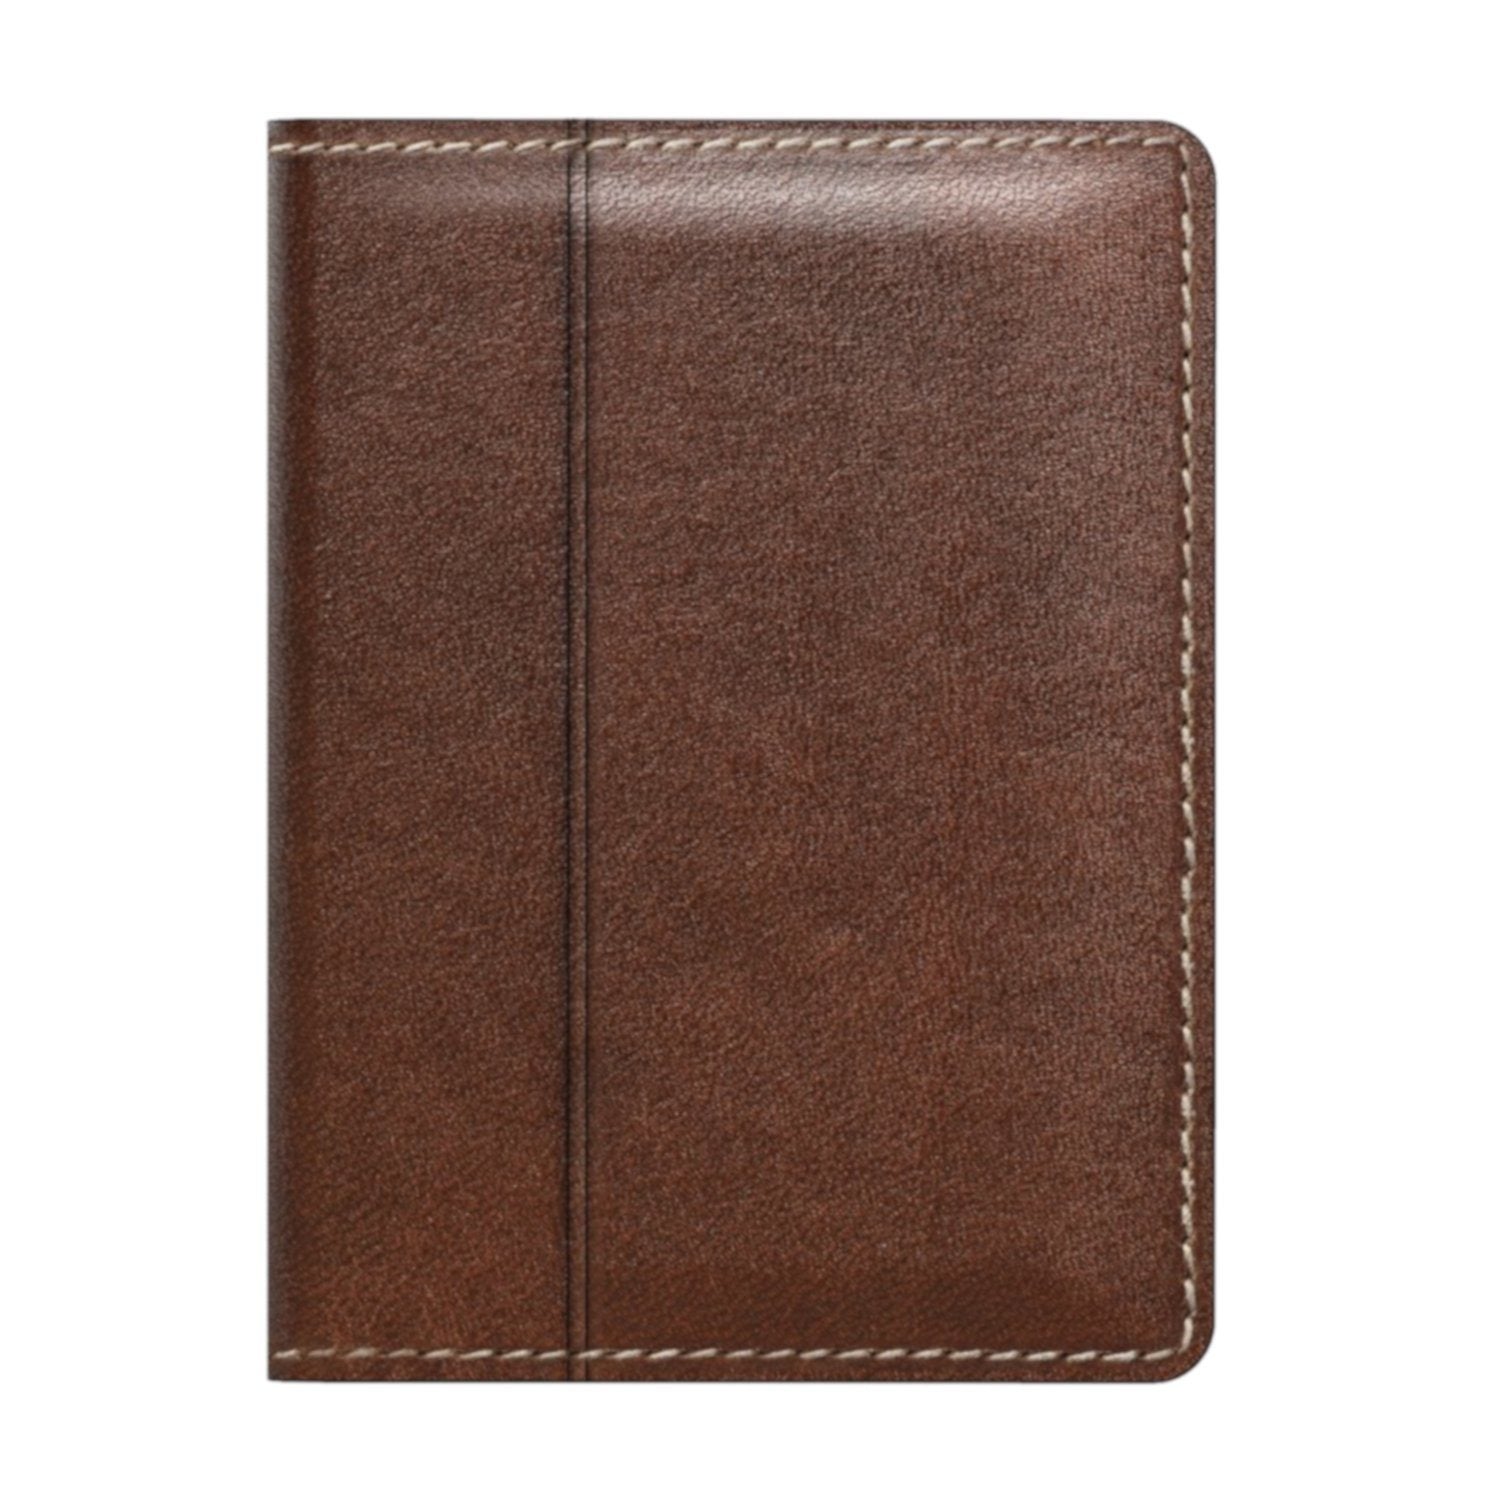 NOMAD Passport Wallet Traditional Edition with Tile Tracking, Brown Wallet NOMAD 